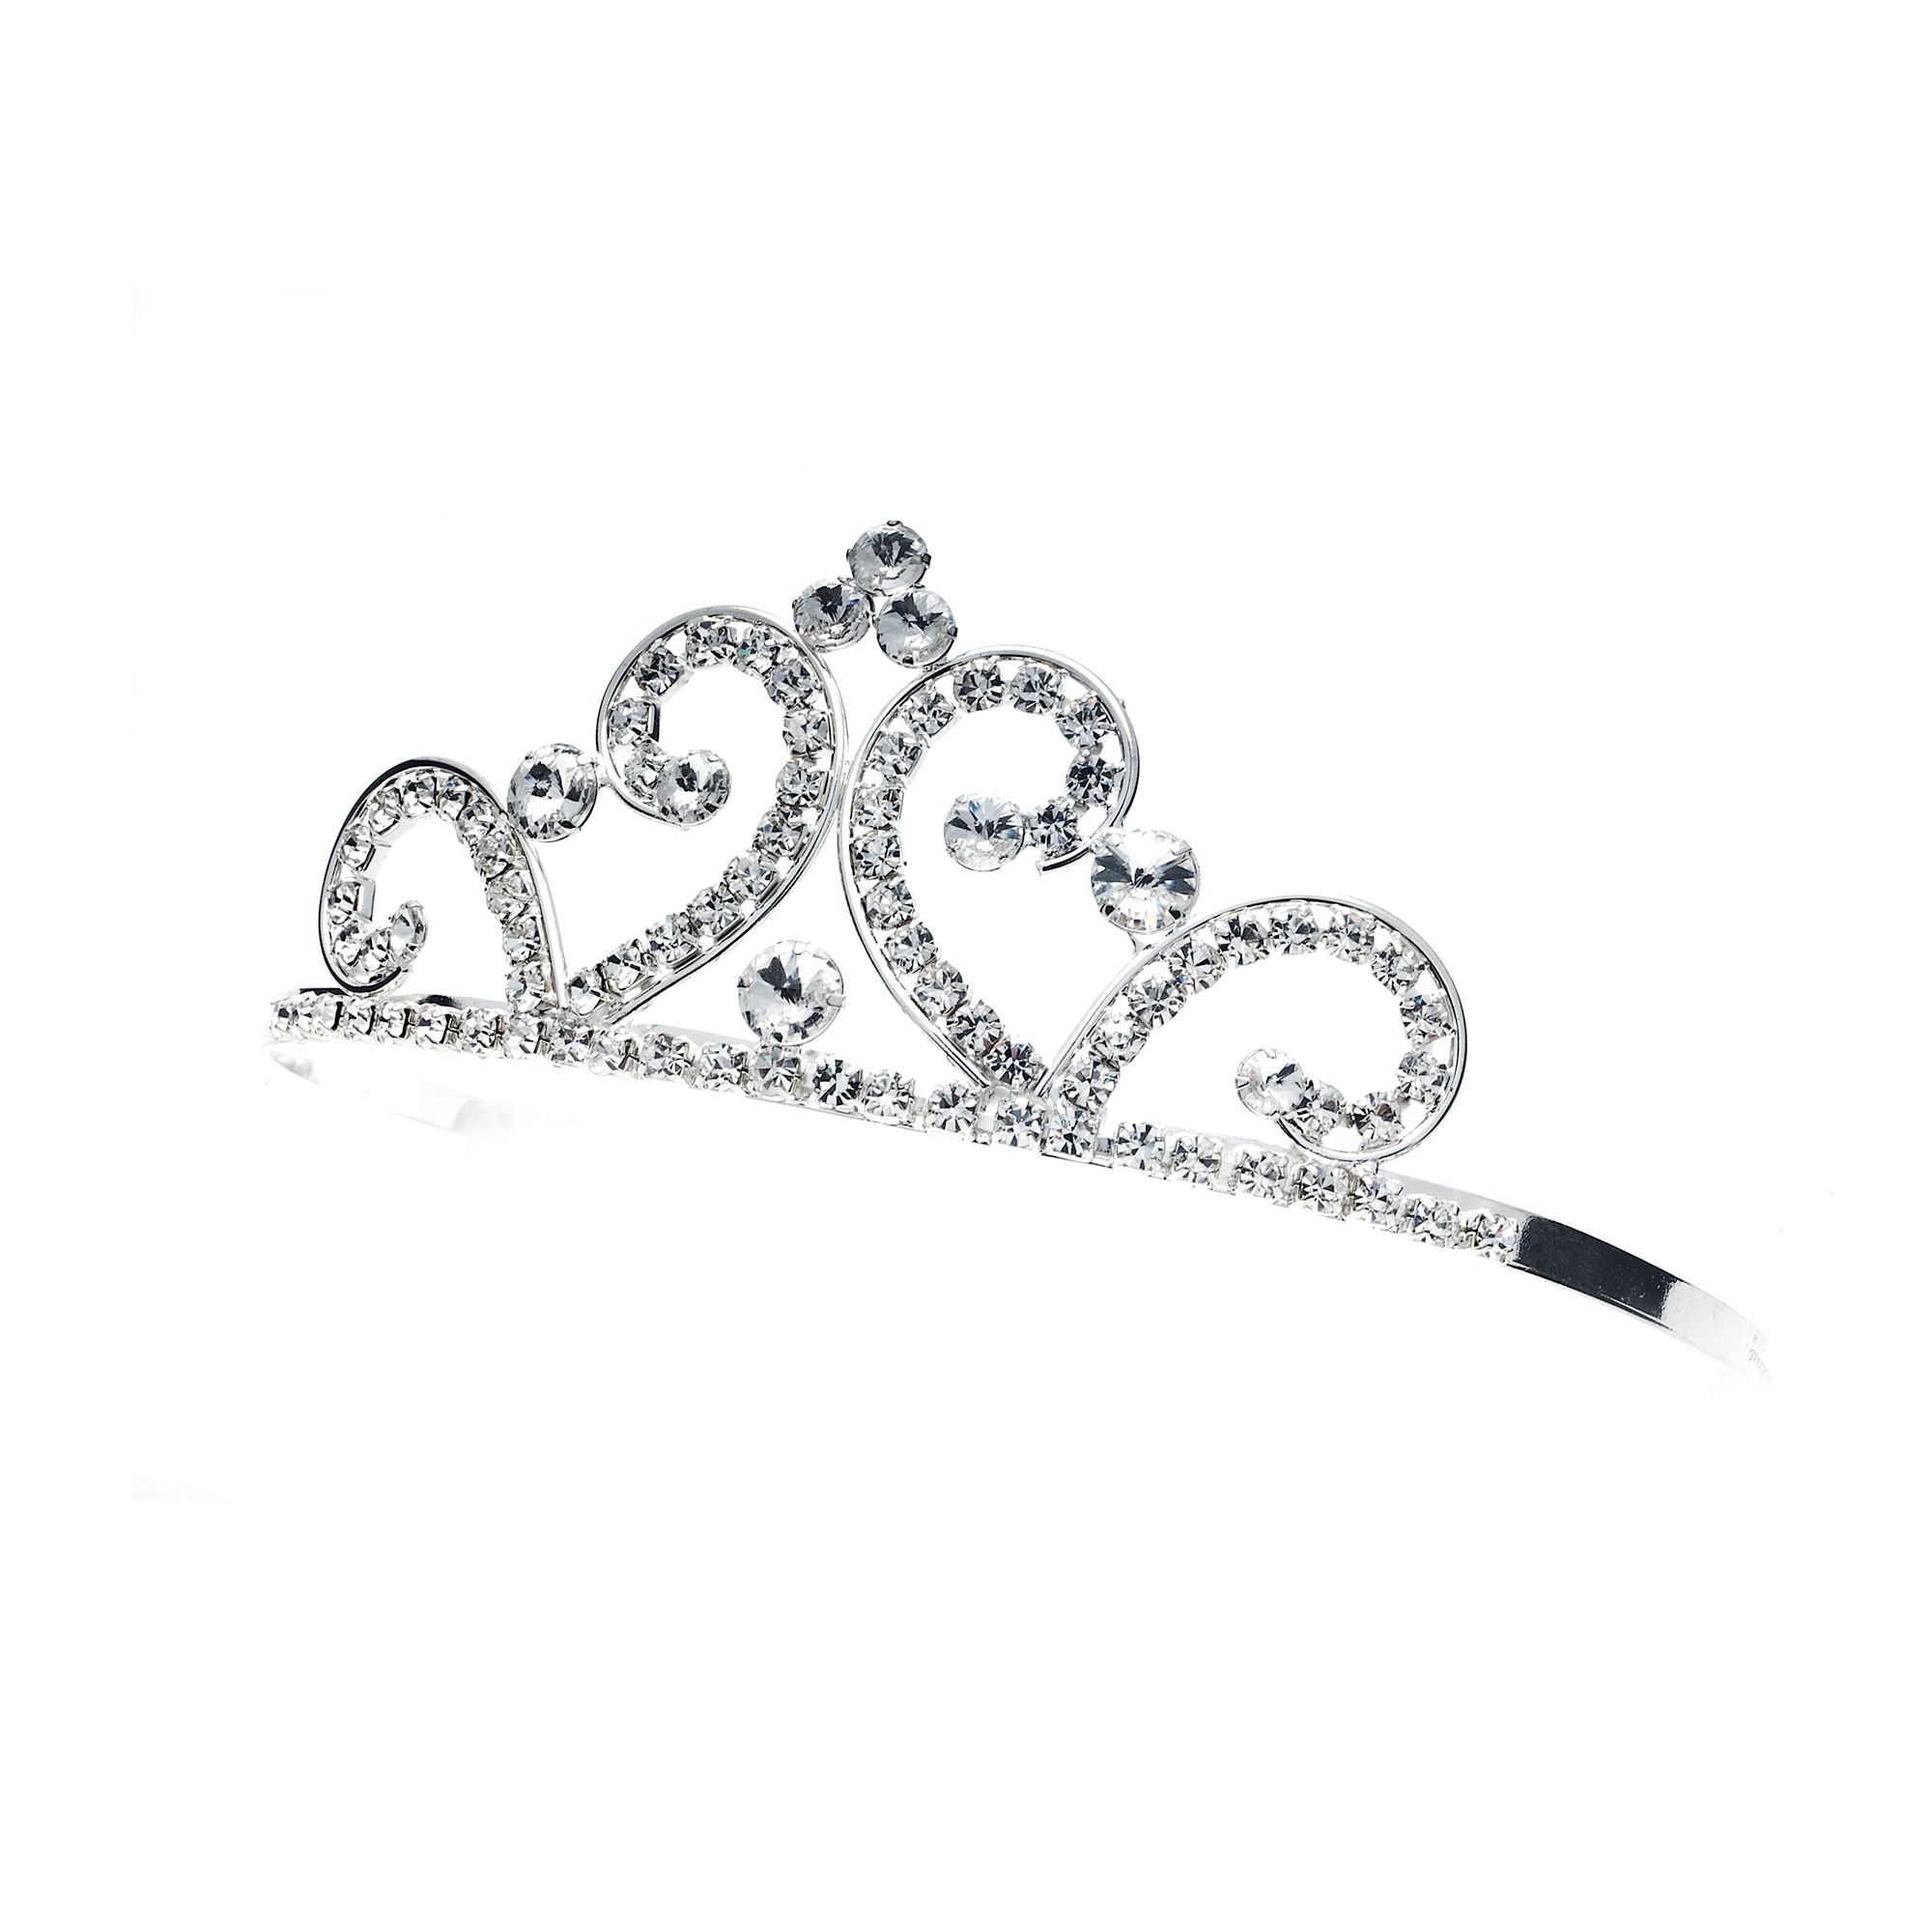 Sparkle Sensation – Find Your Perfect Tiara For Your Perfect Day